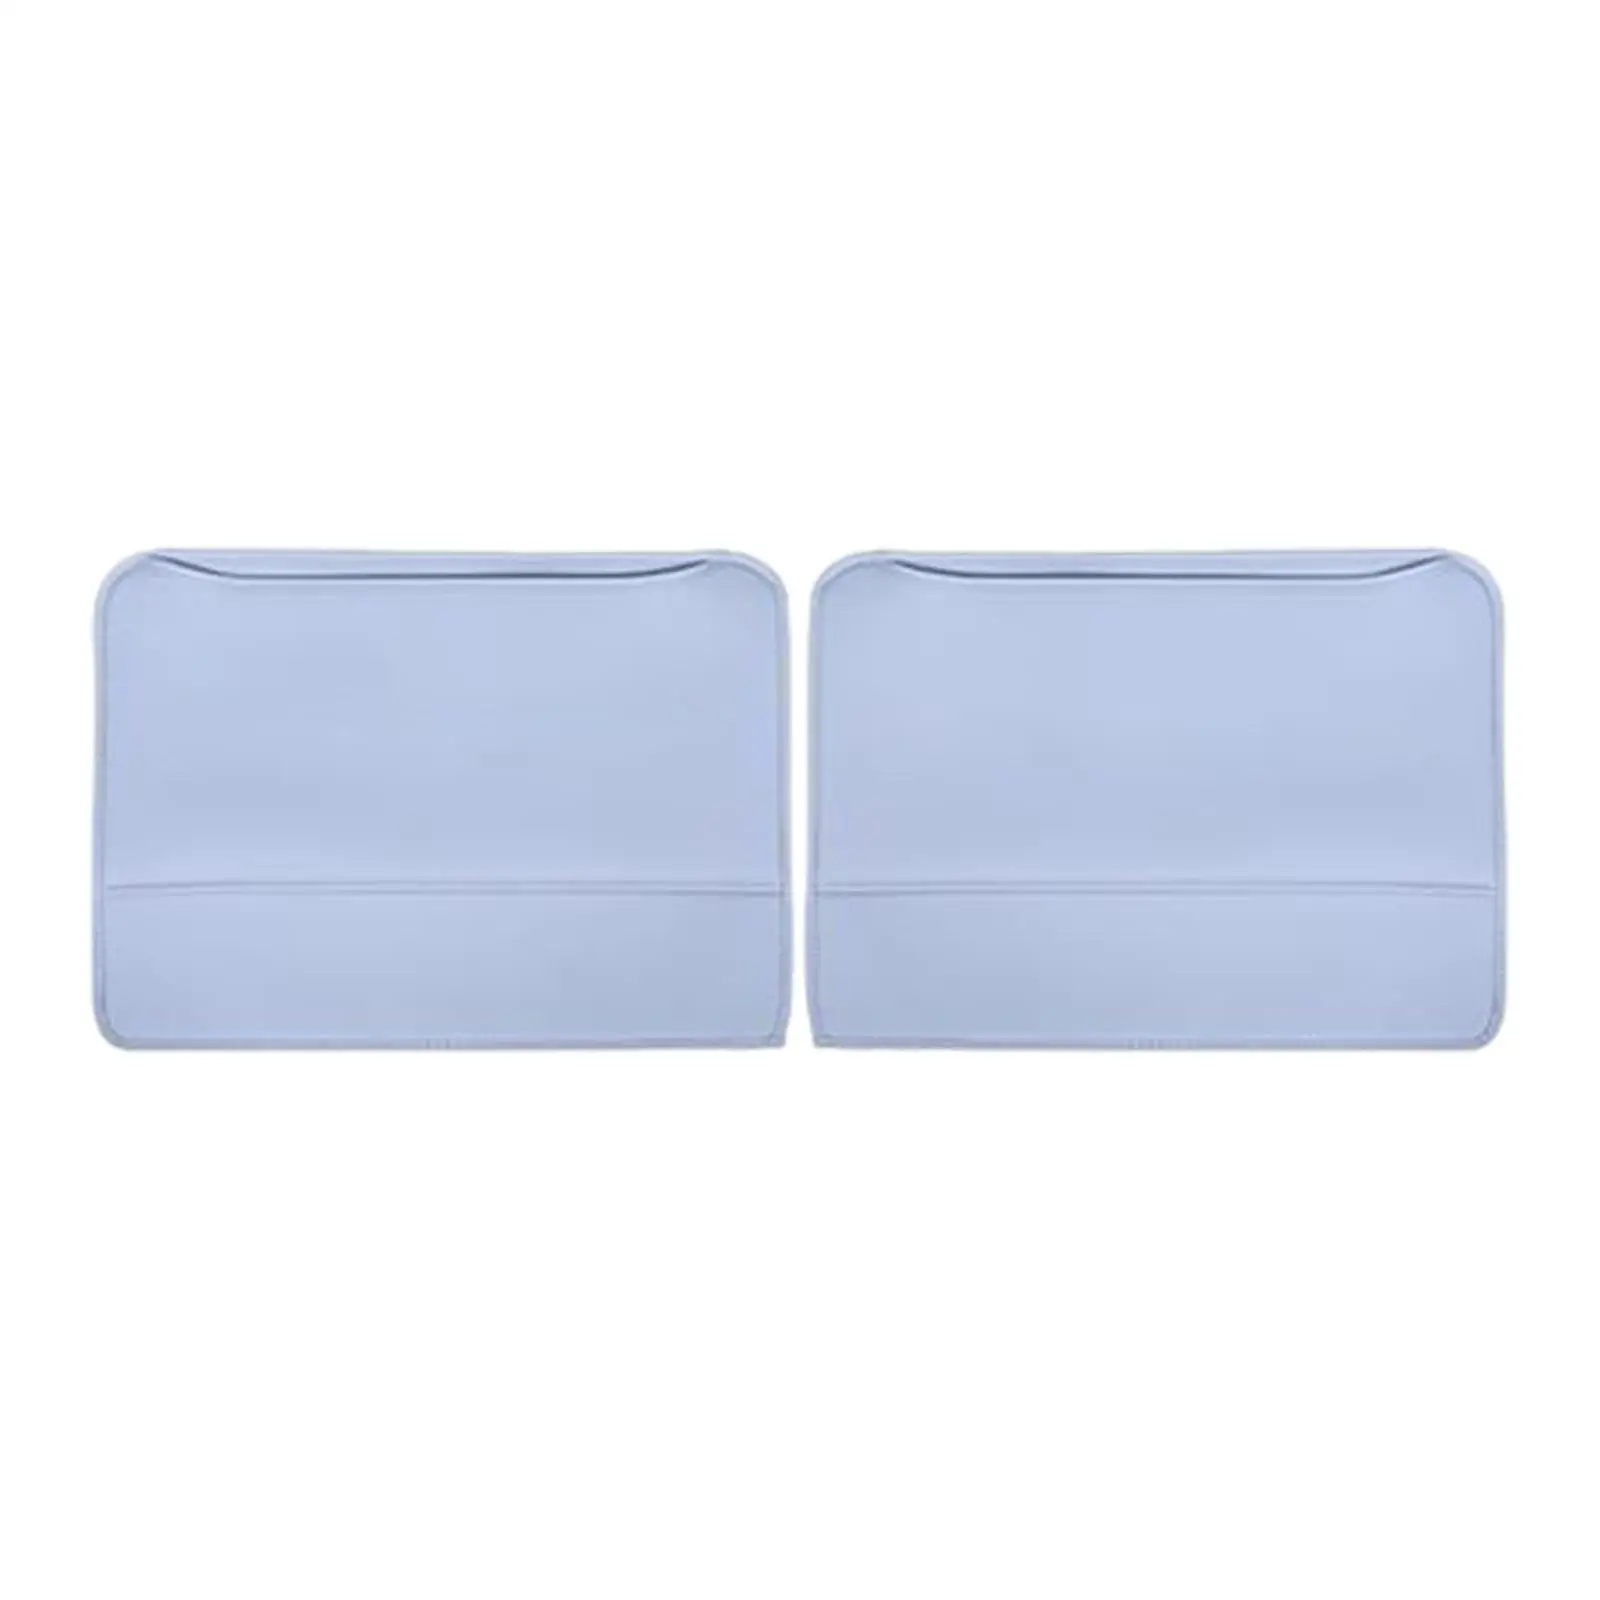 2 Pieces Seat Back Kick Mats Keep Clean and Neat Automotive Accessories Car Back Seat Cover Backseat Protector for Byd Seal